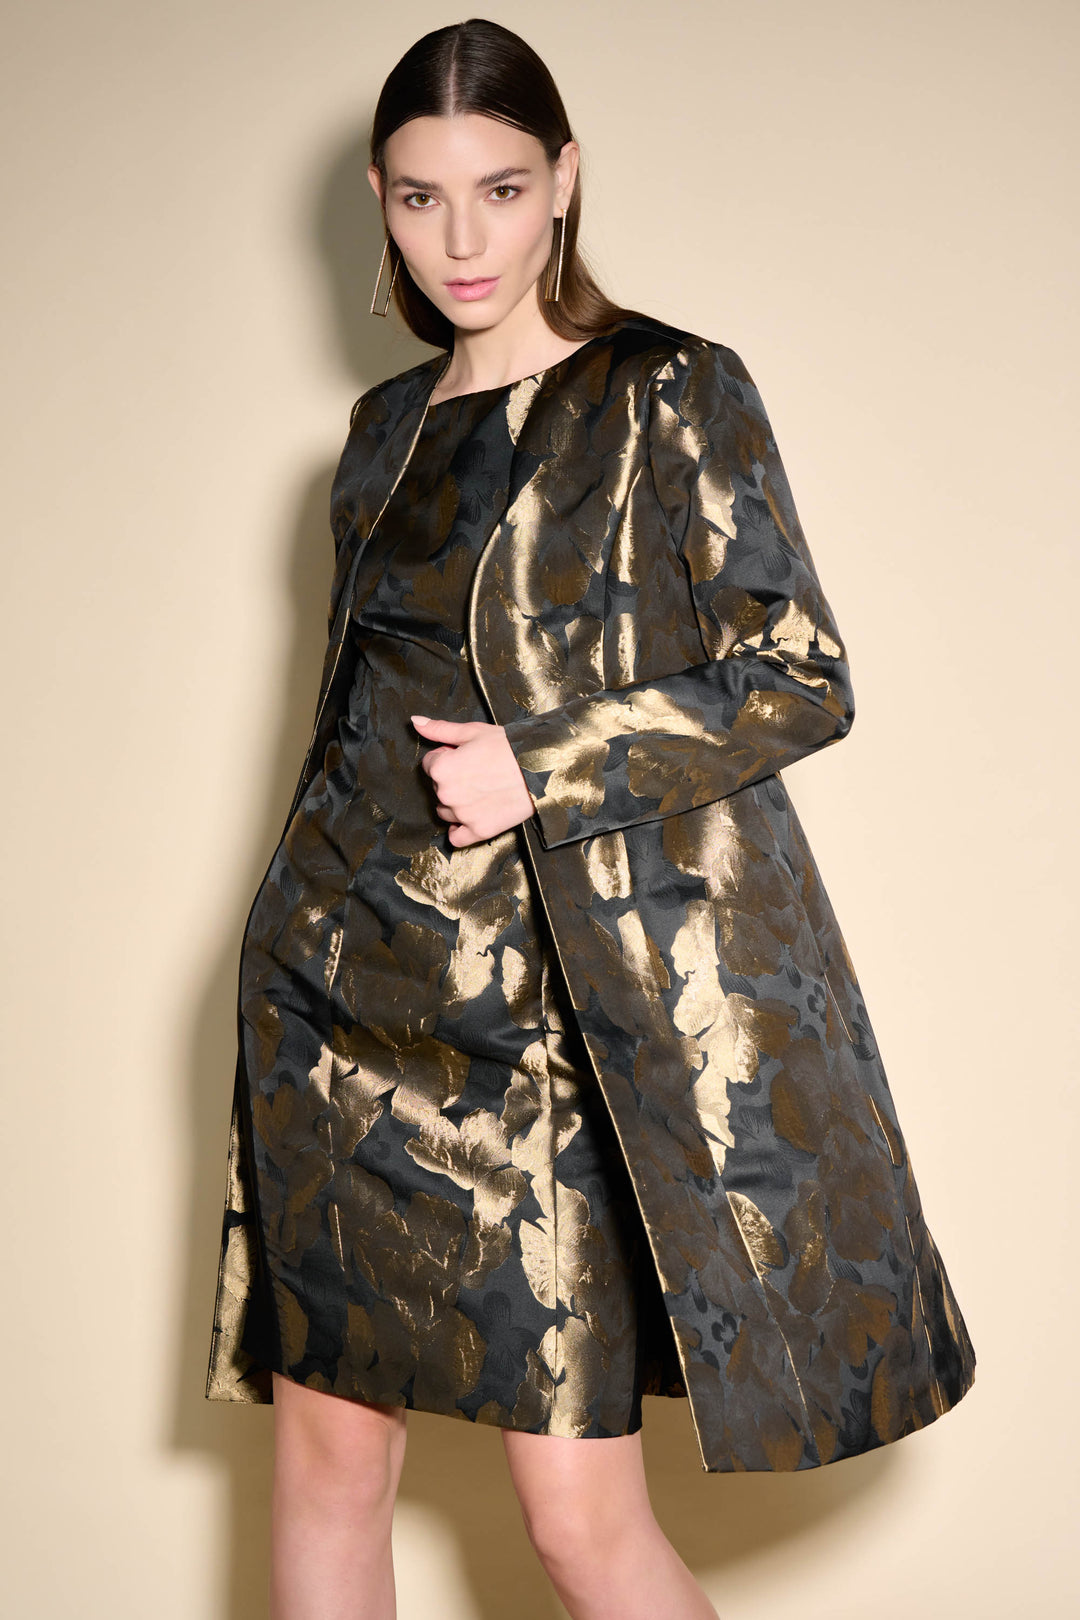 It features an open style light coat and an all-over foil leaf print that adds a glossy golden shine